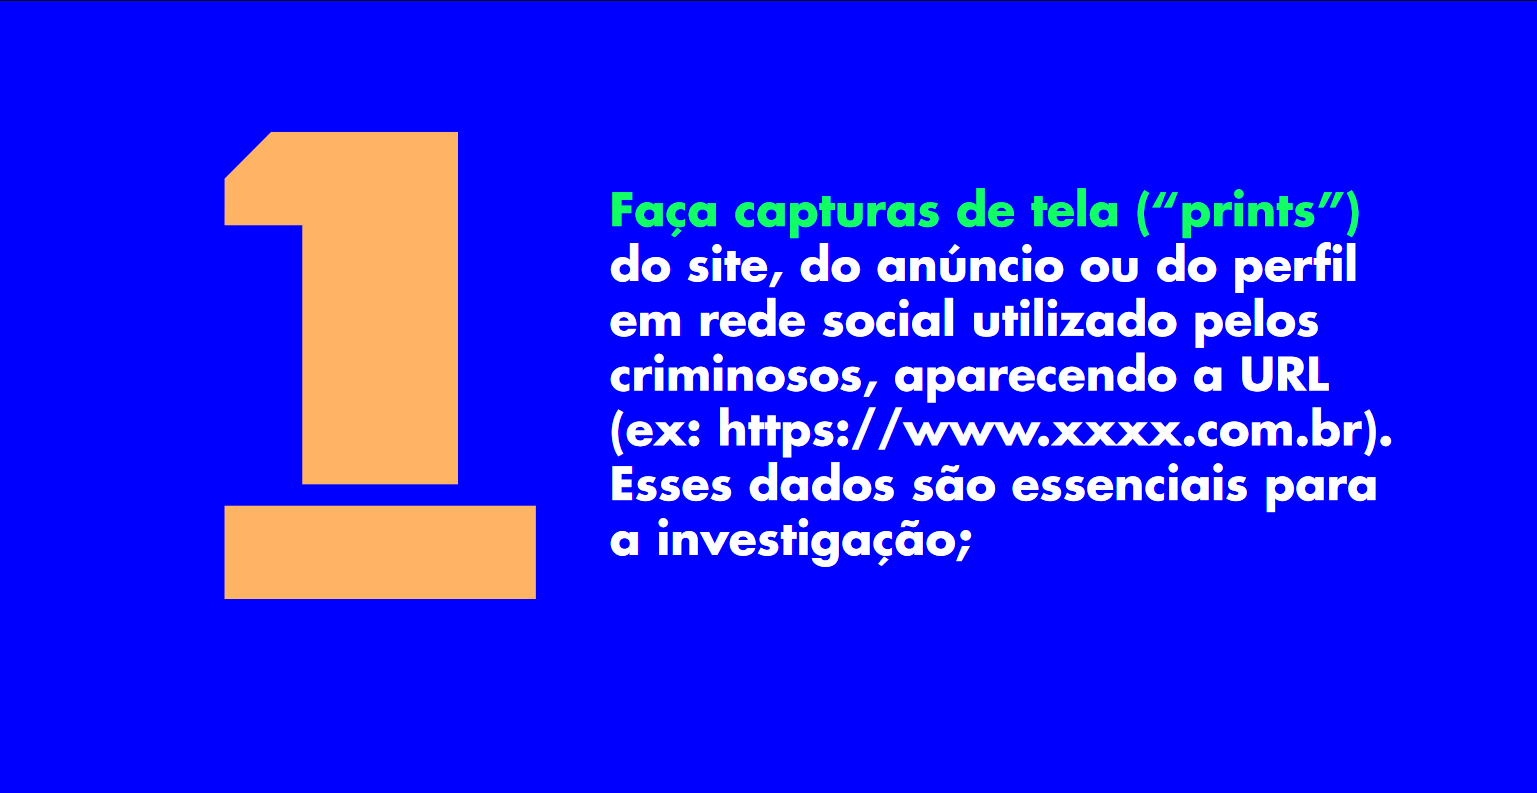 golpe-do-falso-emprestimo-12-mpmg.png